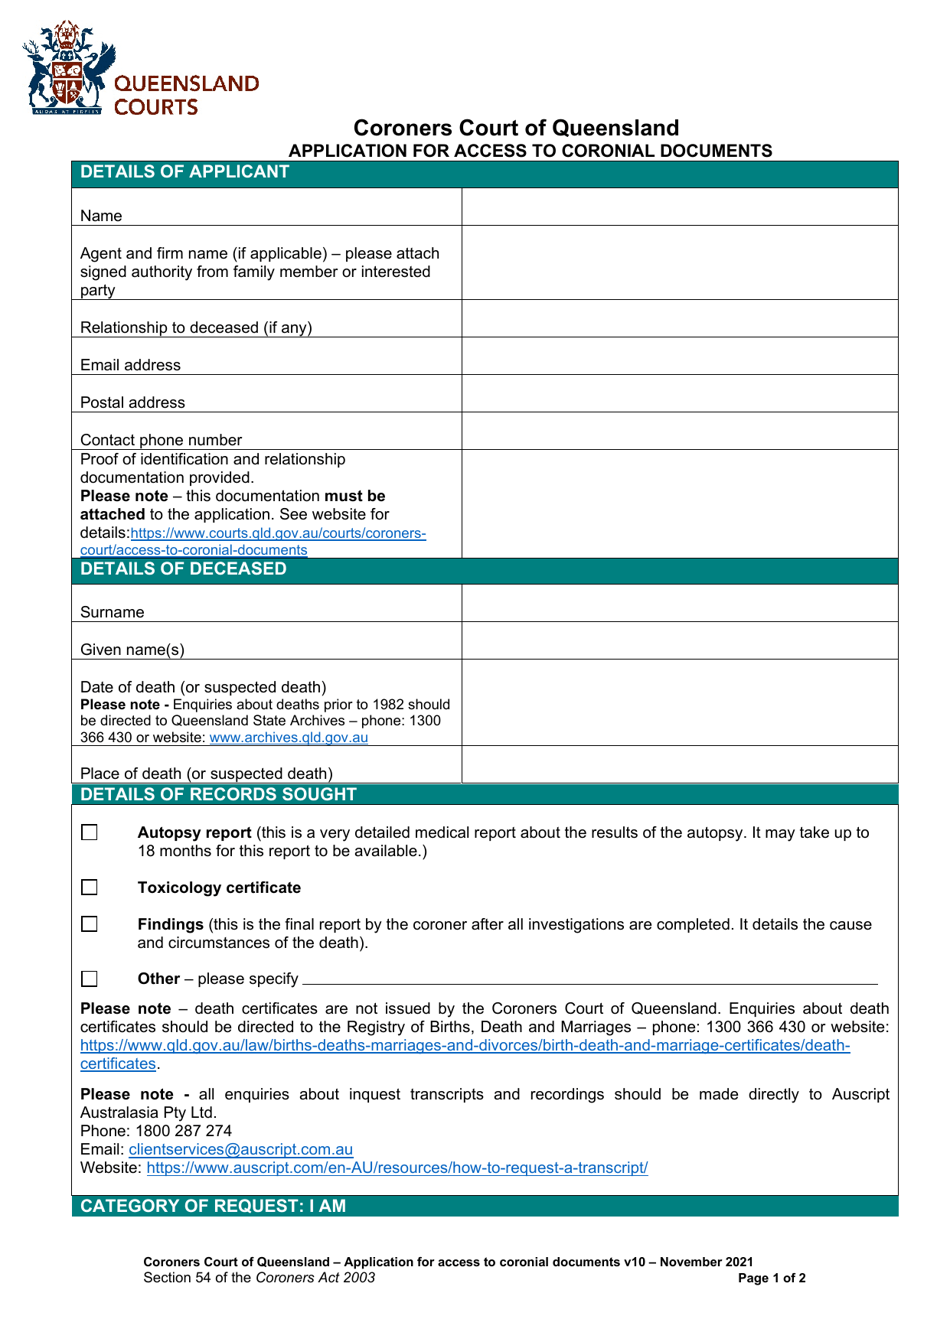 Application for Access to Coronial Documents - Queensland, Australia, Page 1